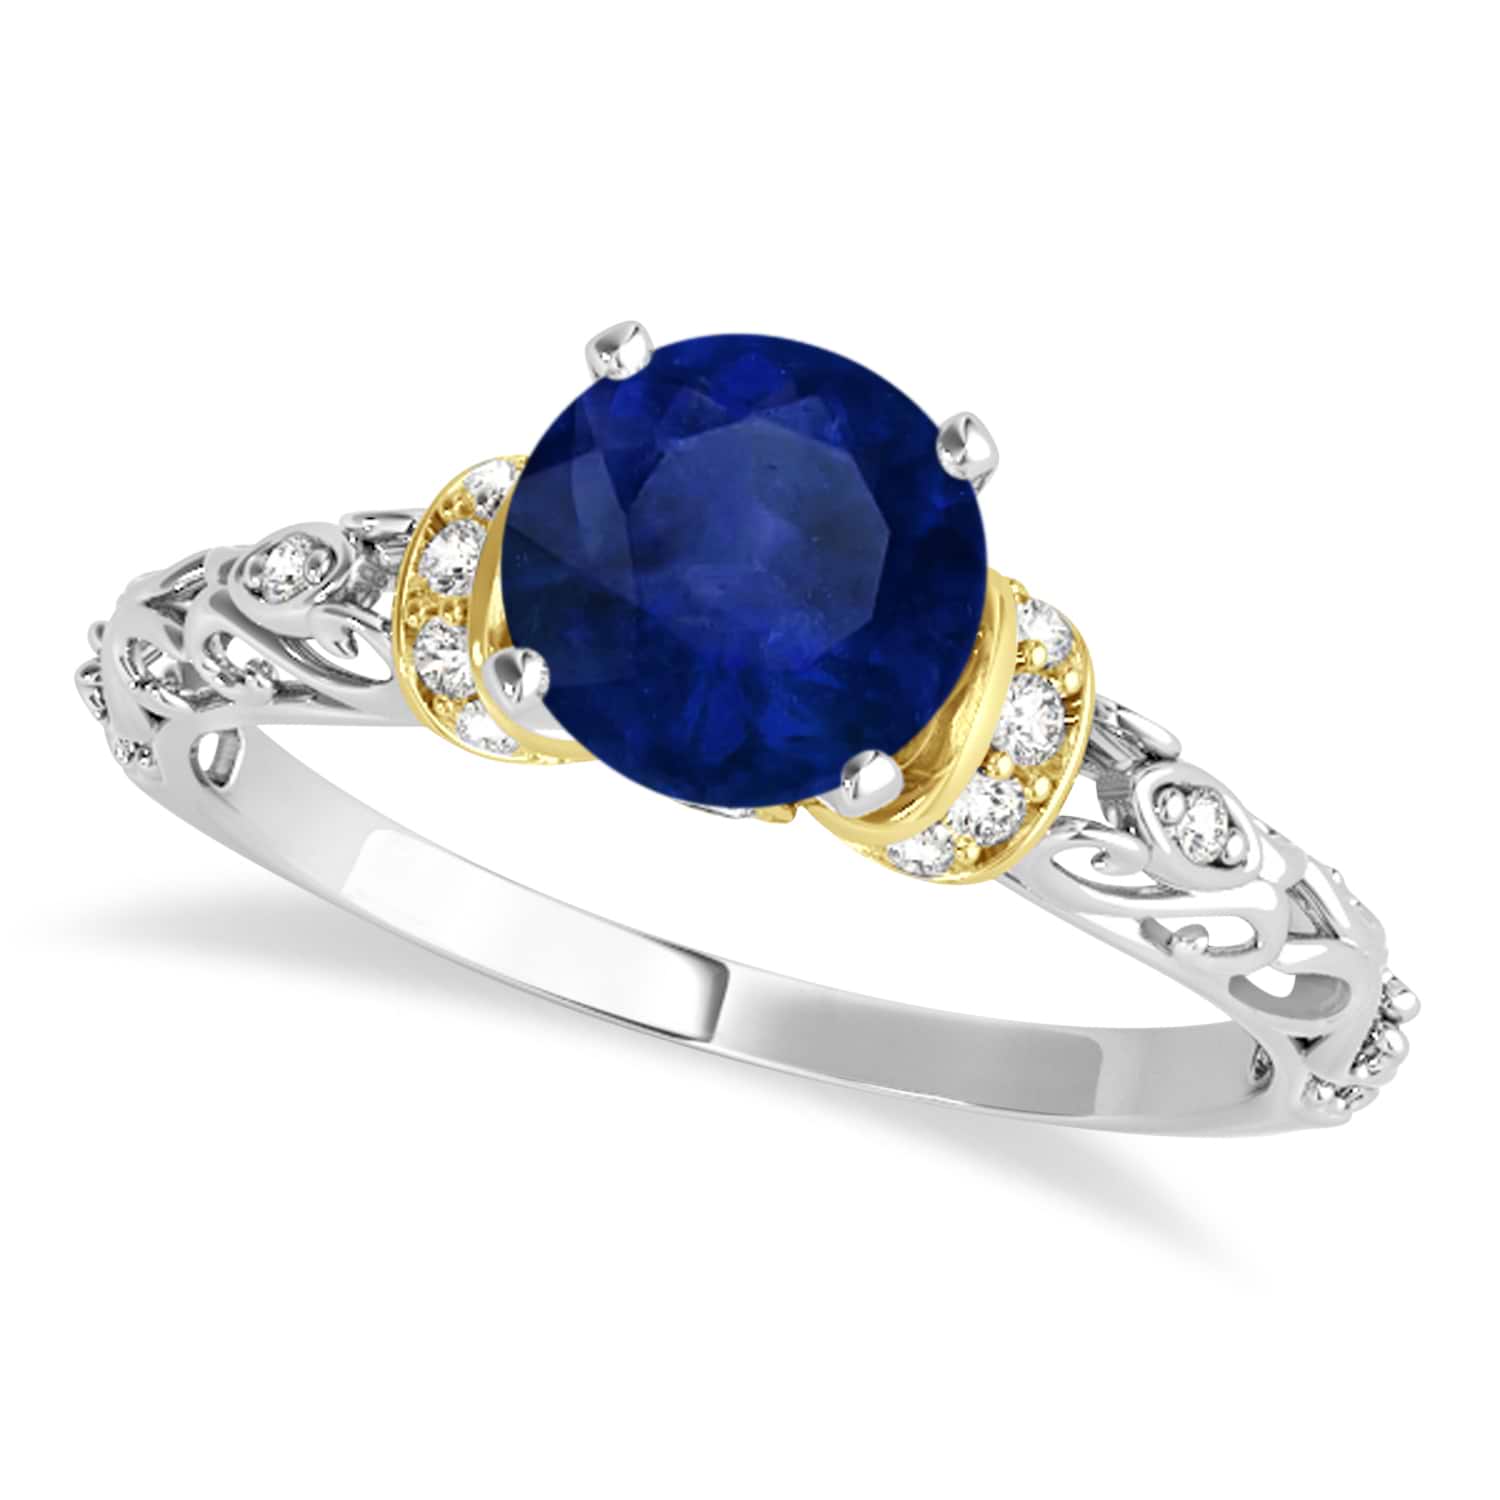 Blue Sapphire & Diamond Antique Style Engagement Ring 14k Two-Tone Gold (0.87ct)